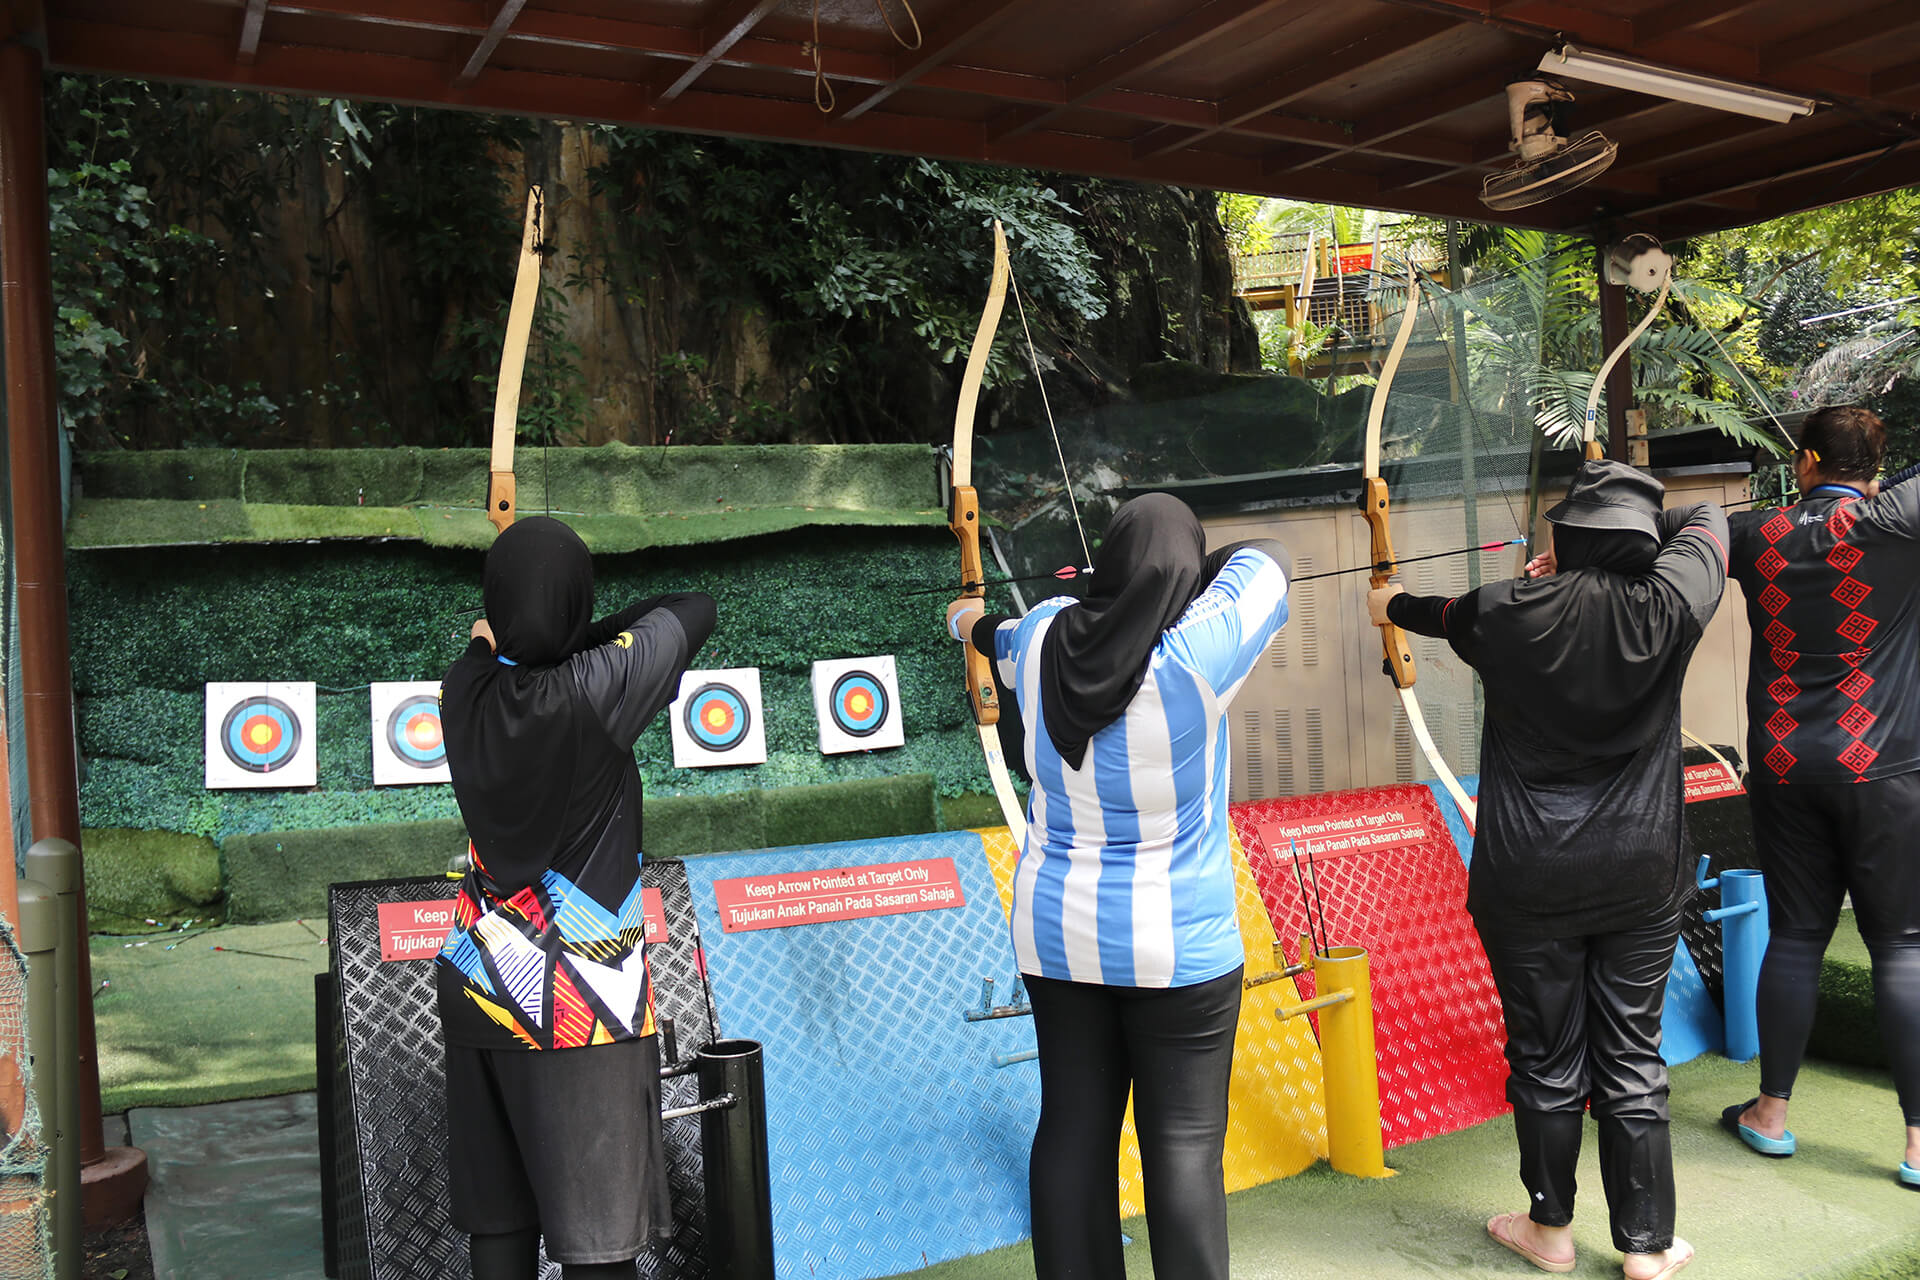 One step closer to gettin’ into S.H.I.E.L.D.! archery at Sunway Lagoon X Park